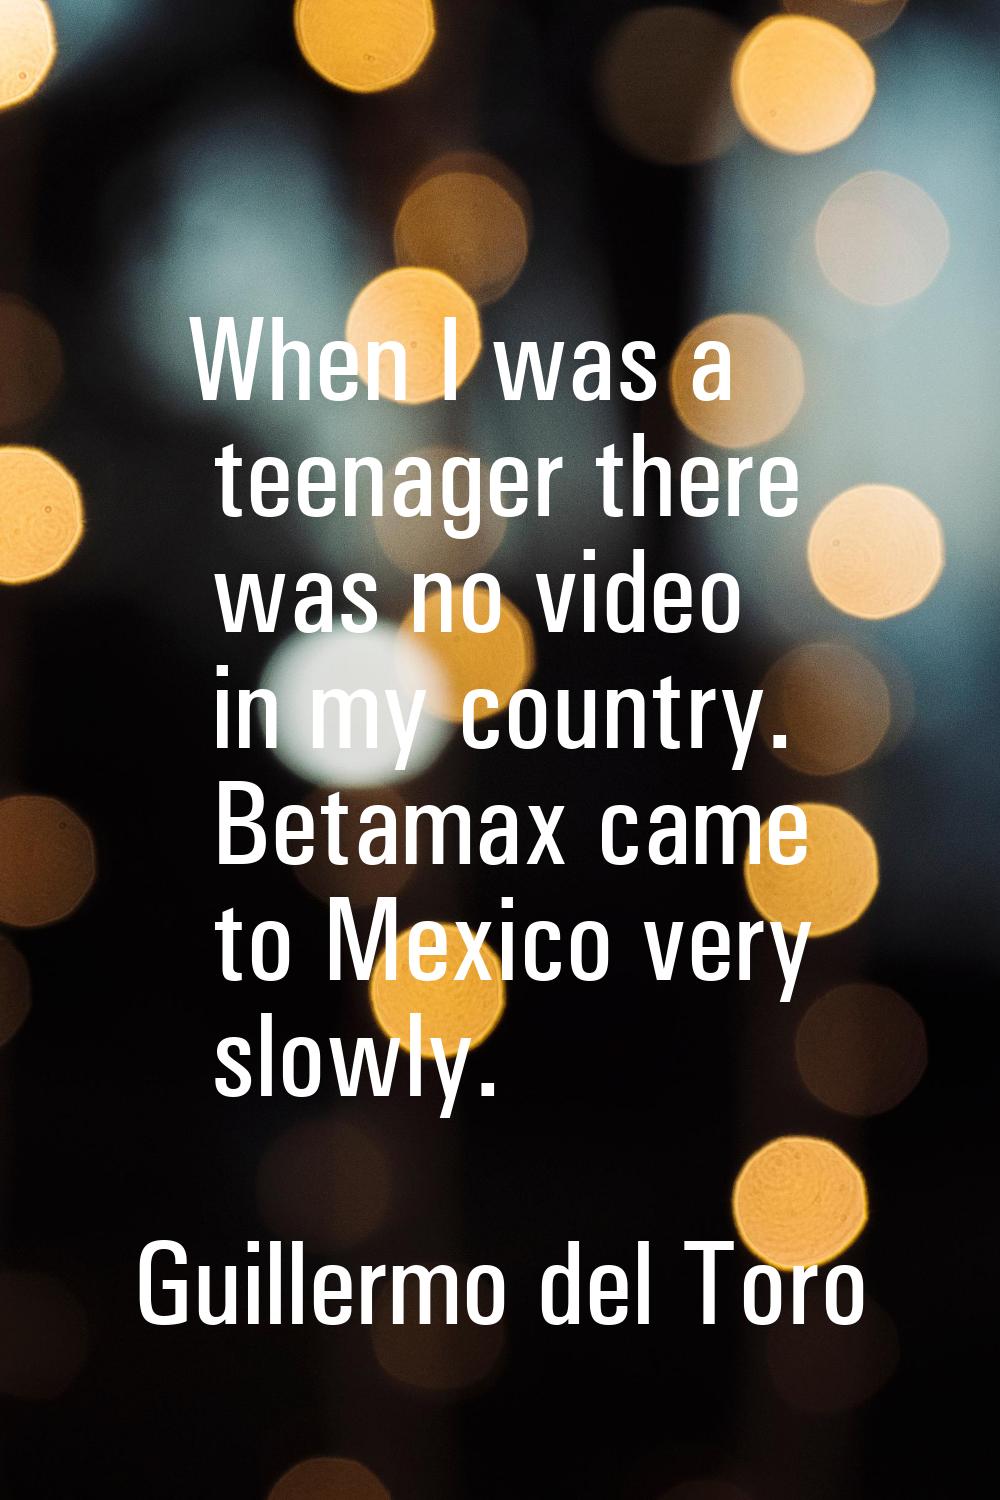 When I was a teenager there was no video in my country. Betamax came to Mexico very slowly.